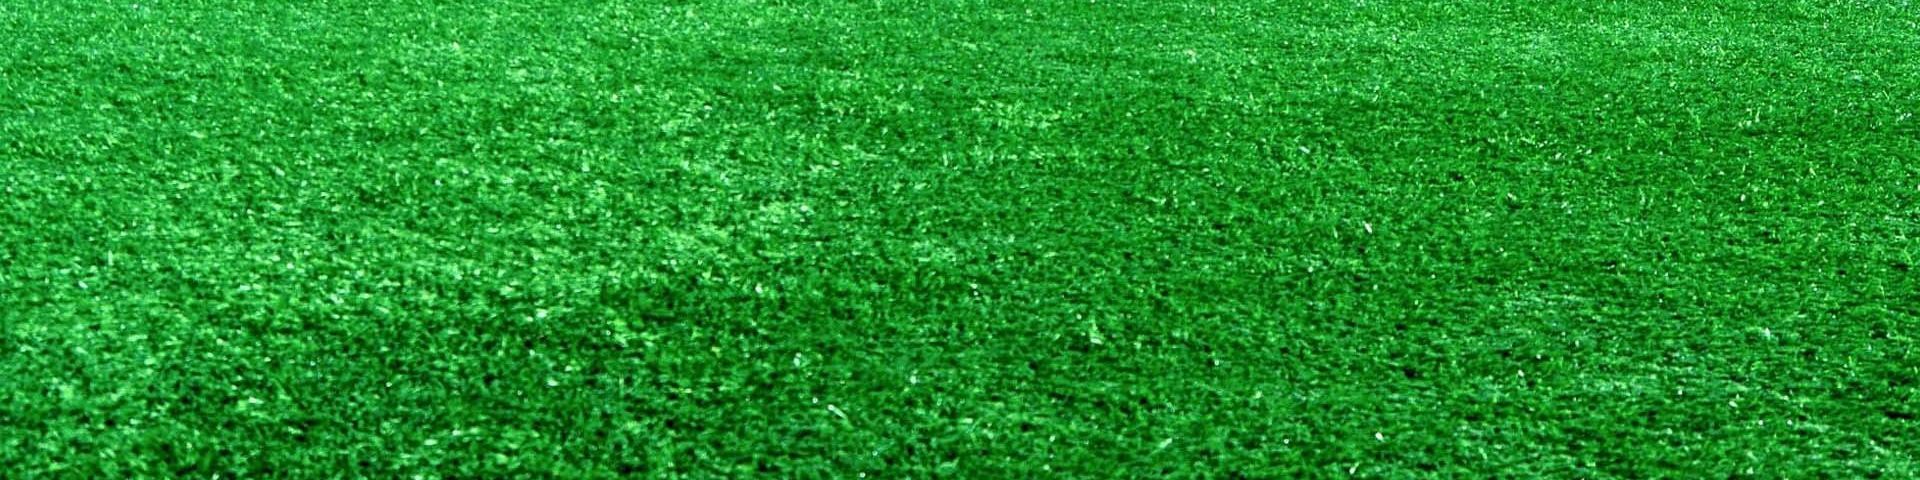 A close-up of the grass on a football pitch.